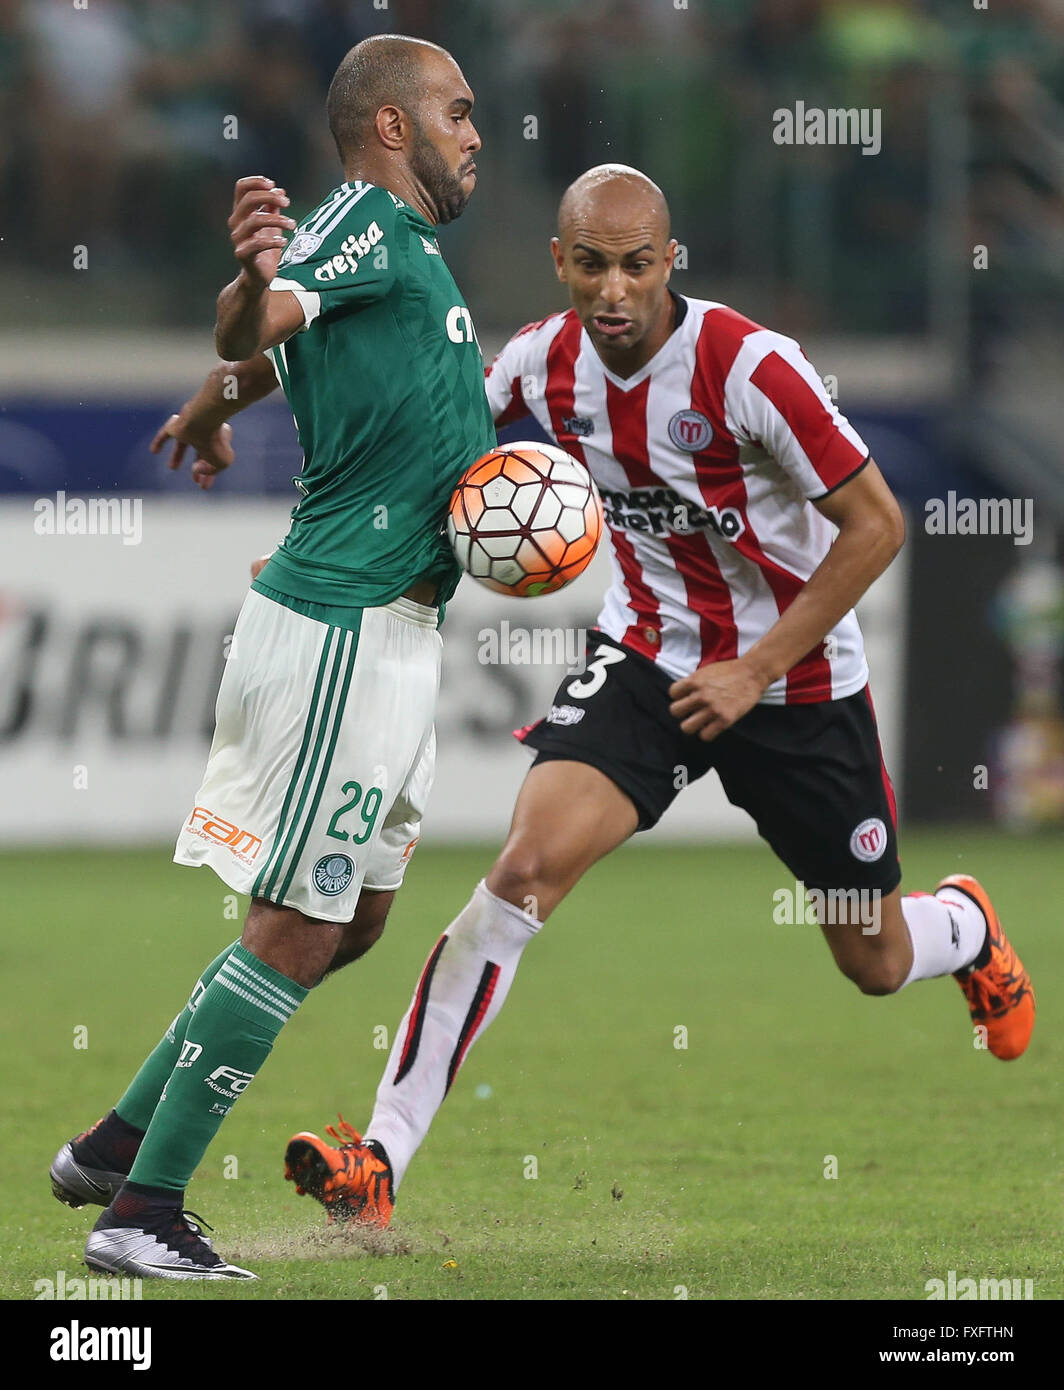 SAO PAULO, Brazil - 14/04/2016: PALM RIVER PLATE X URU - The Alecsandro player, SE Palmeiras, ball dispute with the player Ronaldo Concei??o, CA River Plate, during a match valid for the sixth round of the group stage of the Copa Libertadores at the Allianz Arena Park. Photo: Cesar Greco / FotoArena/Alamy Live News Stock Photo